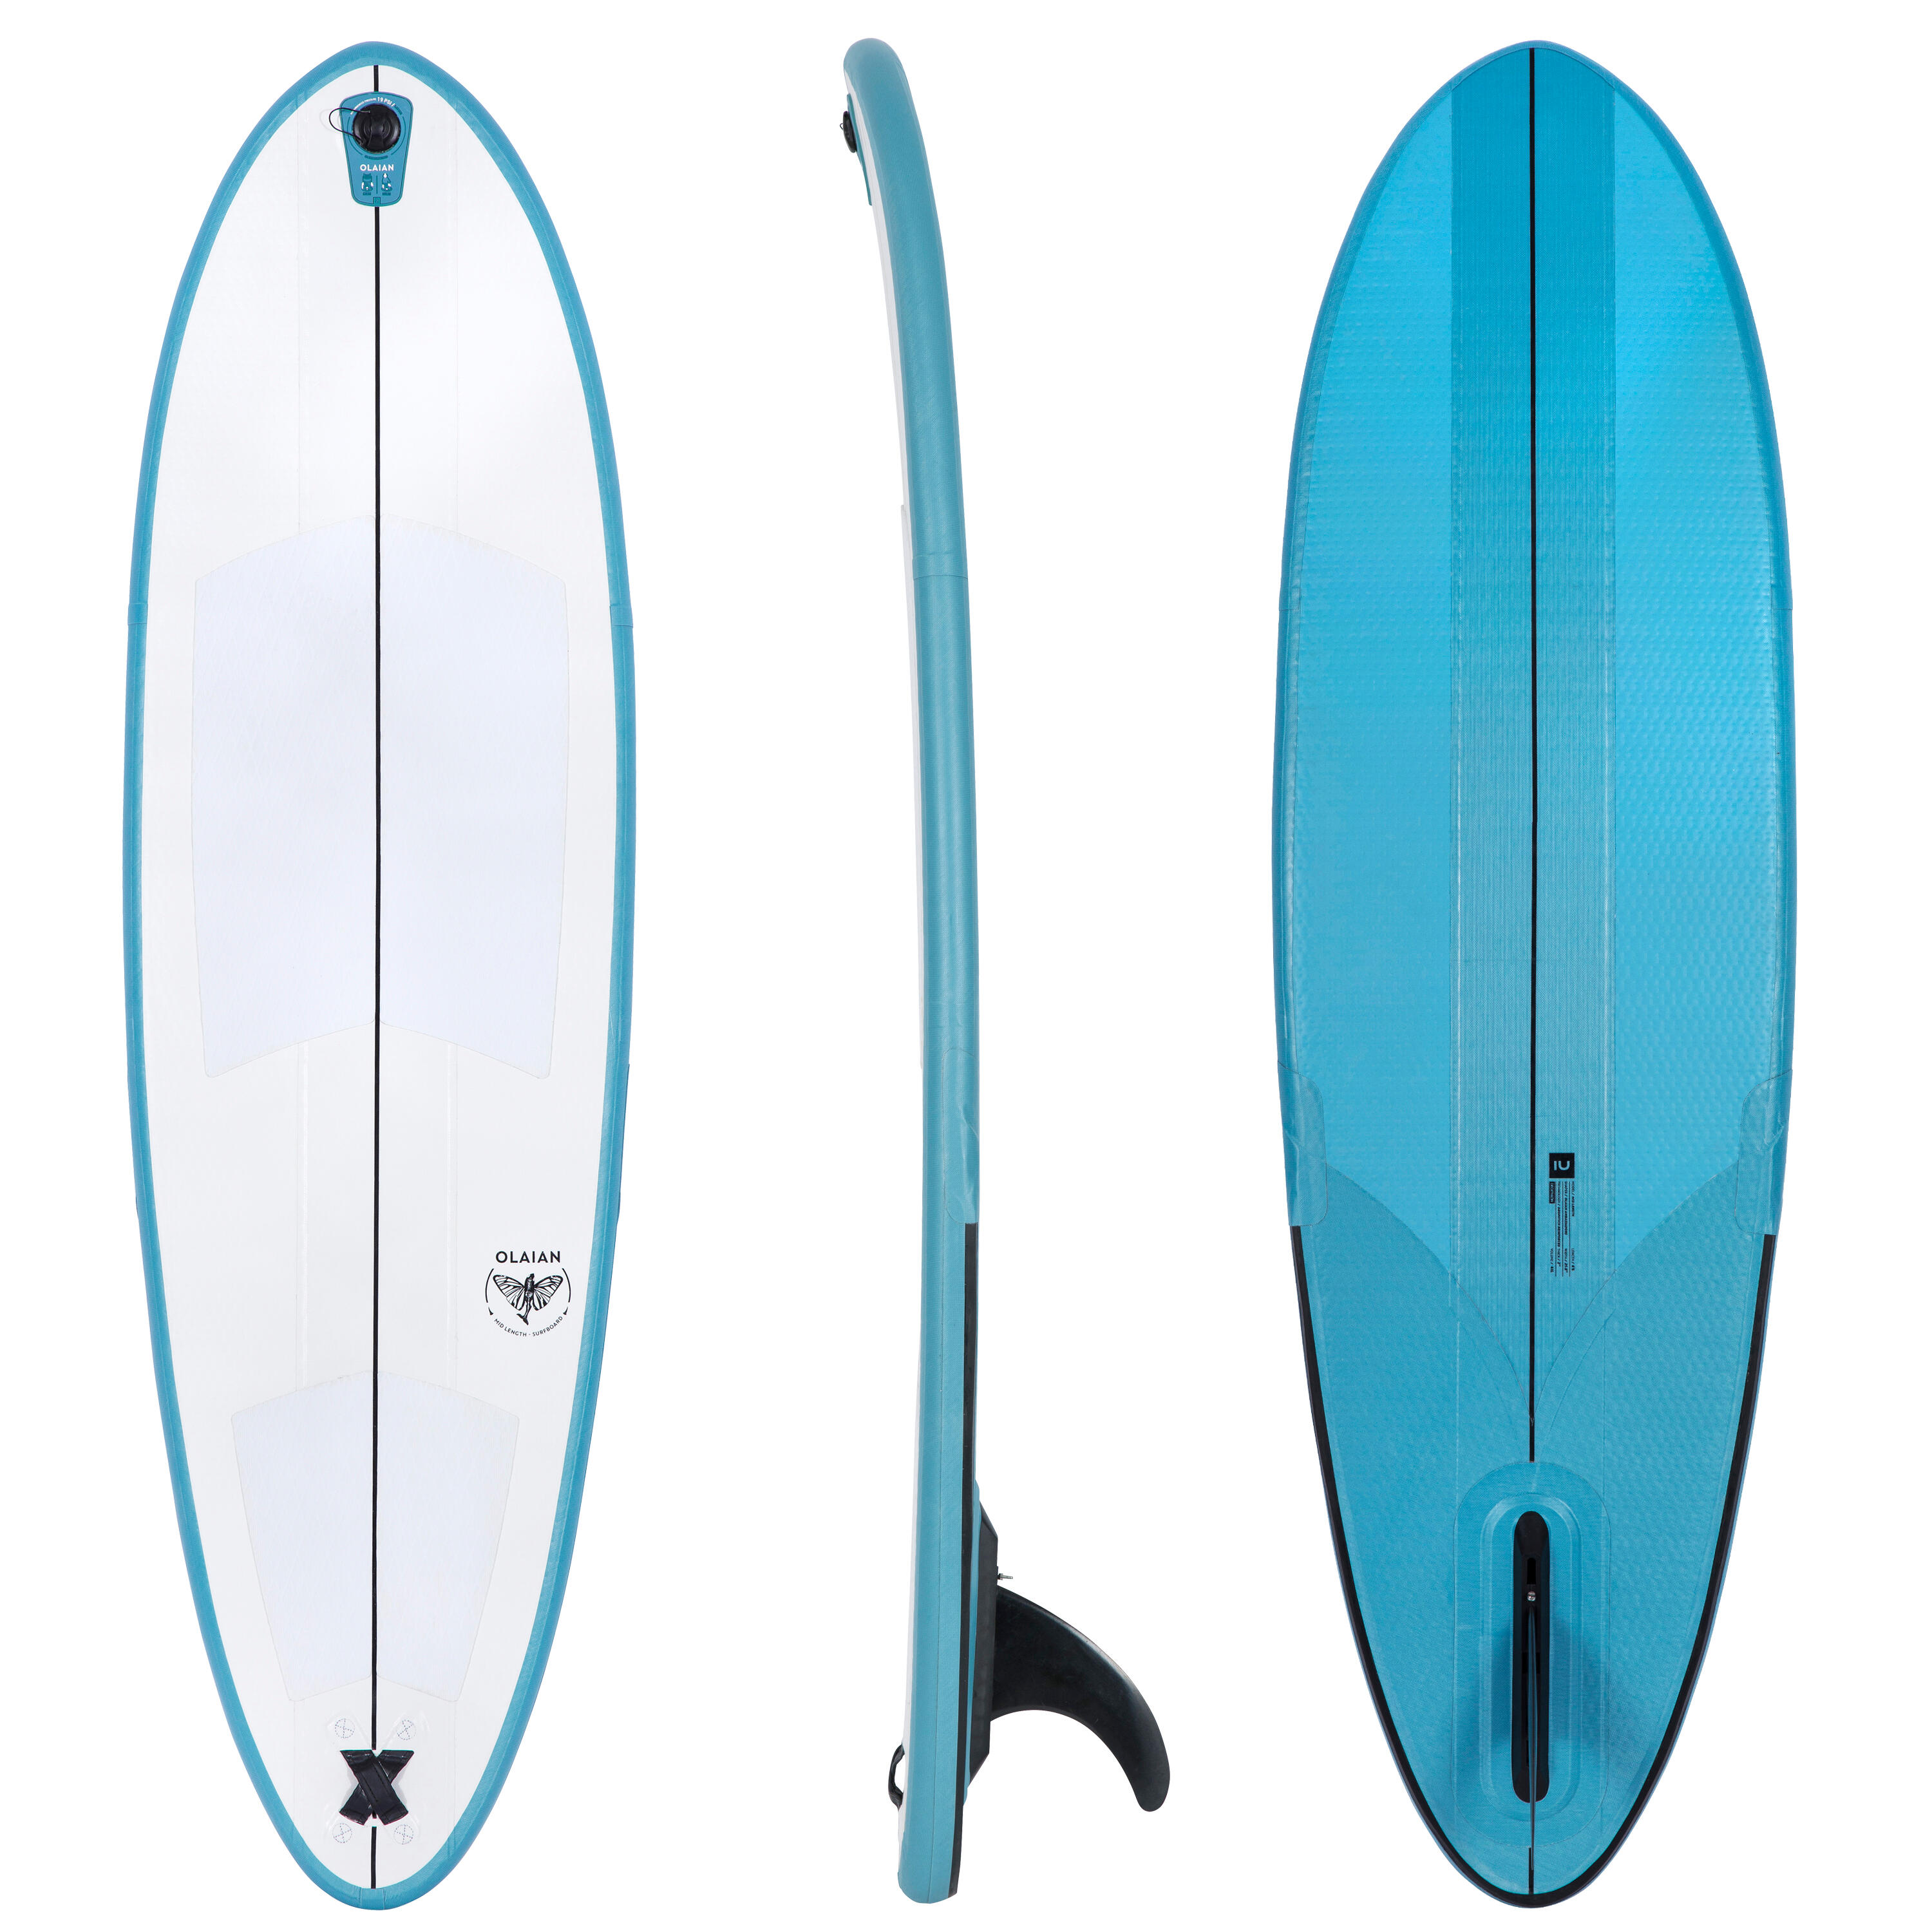 Compact inflatable surfboard 500 6'6” (without pump or leash) 1/14